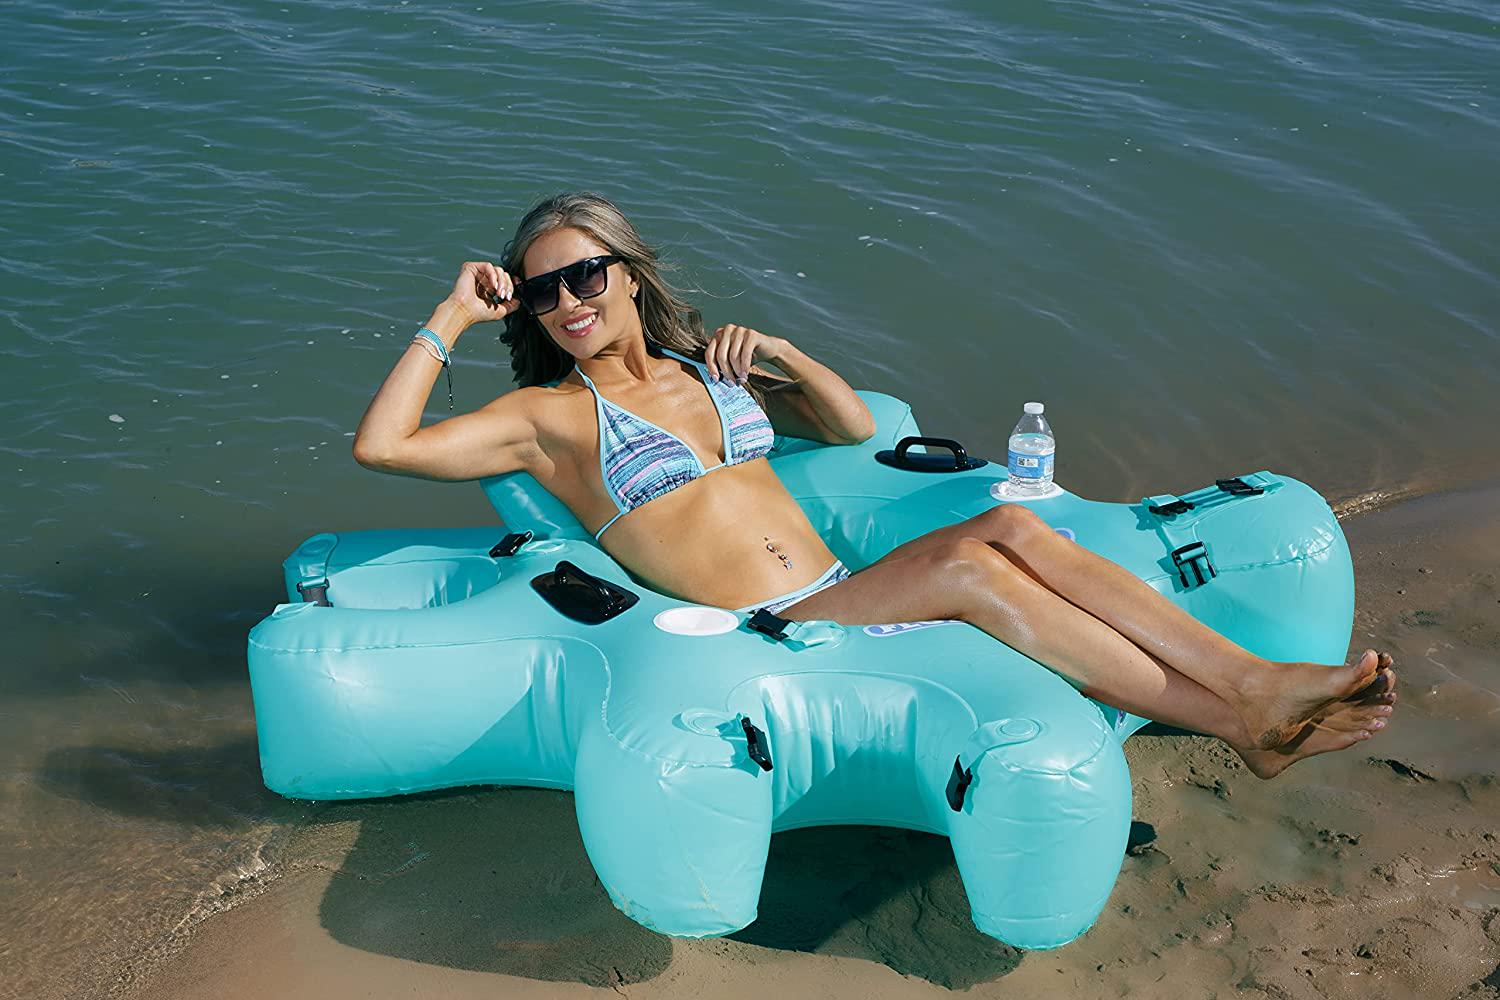 Fluzzle Tube, Fluzzle Tube 4.0 Back Rest and XL MESH Bottom, 24 Gauge 6P Free Vinyl, 2 Cup Holders and 2 Handles (Teal)